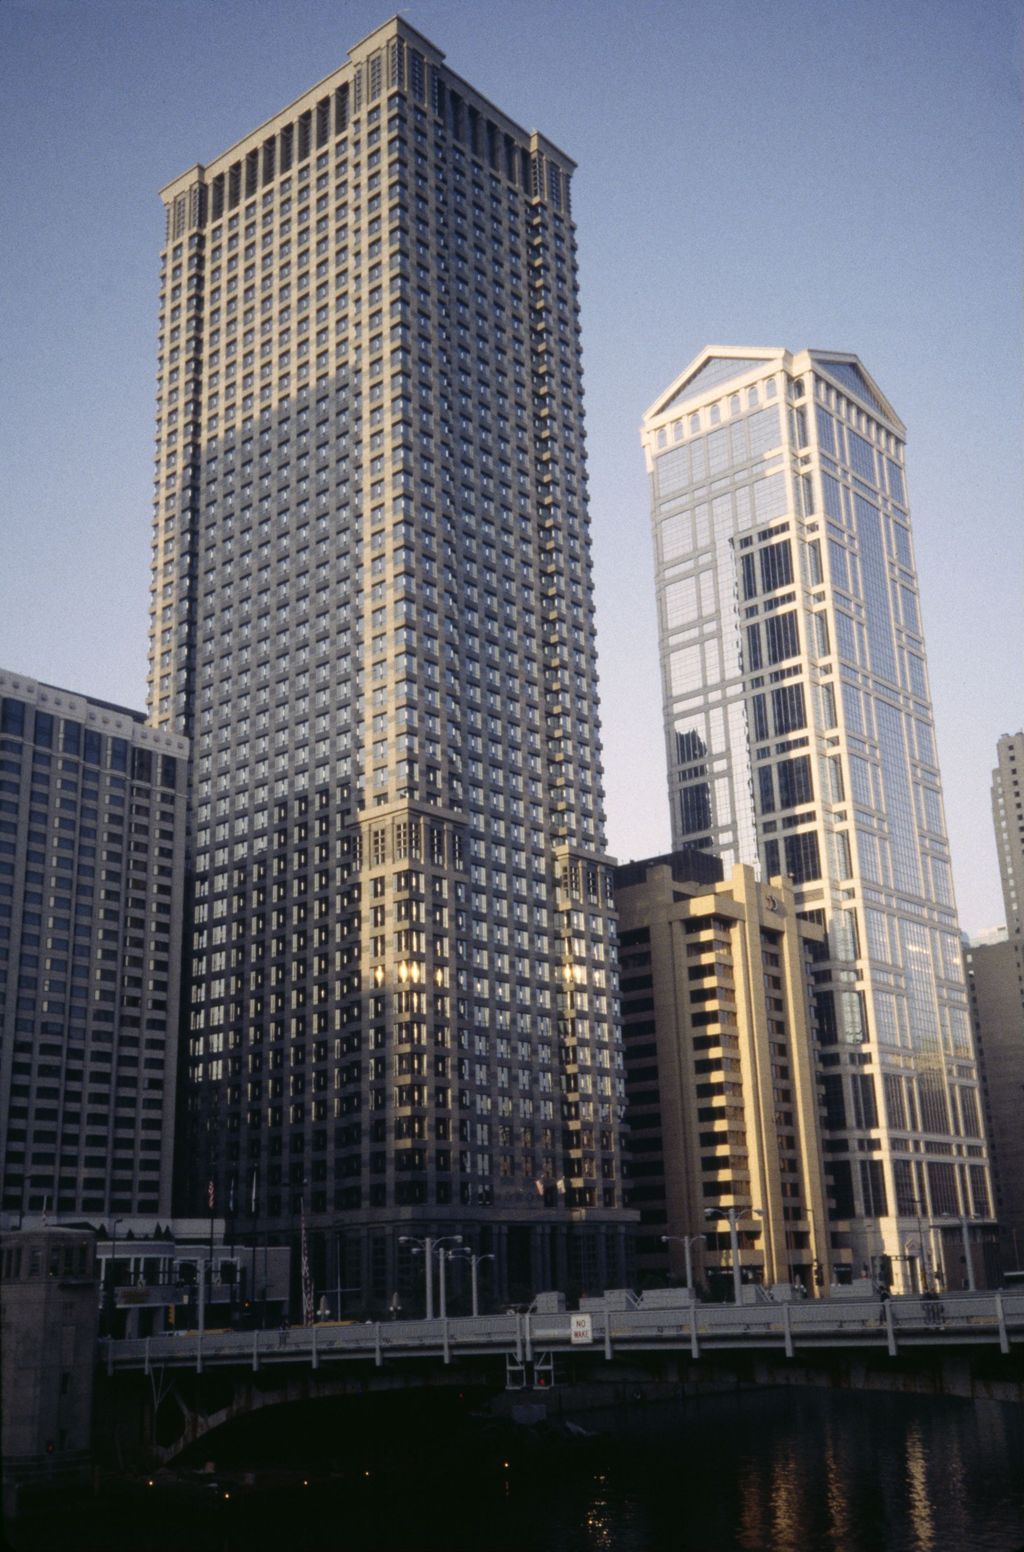 Leo Burnett Building and R. R. Donnelley Building